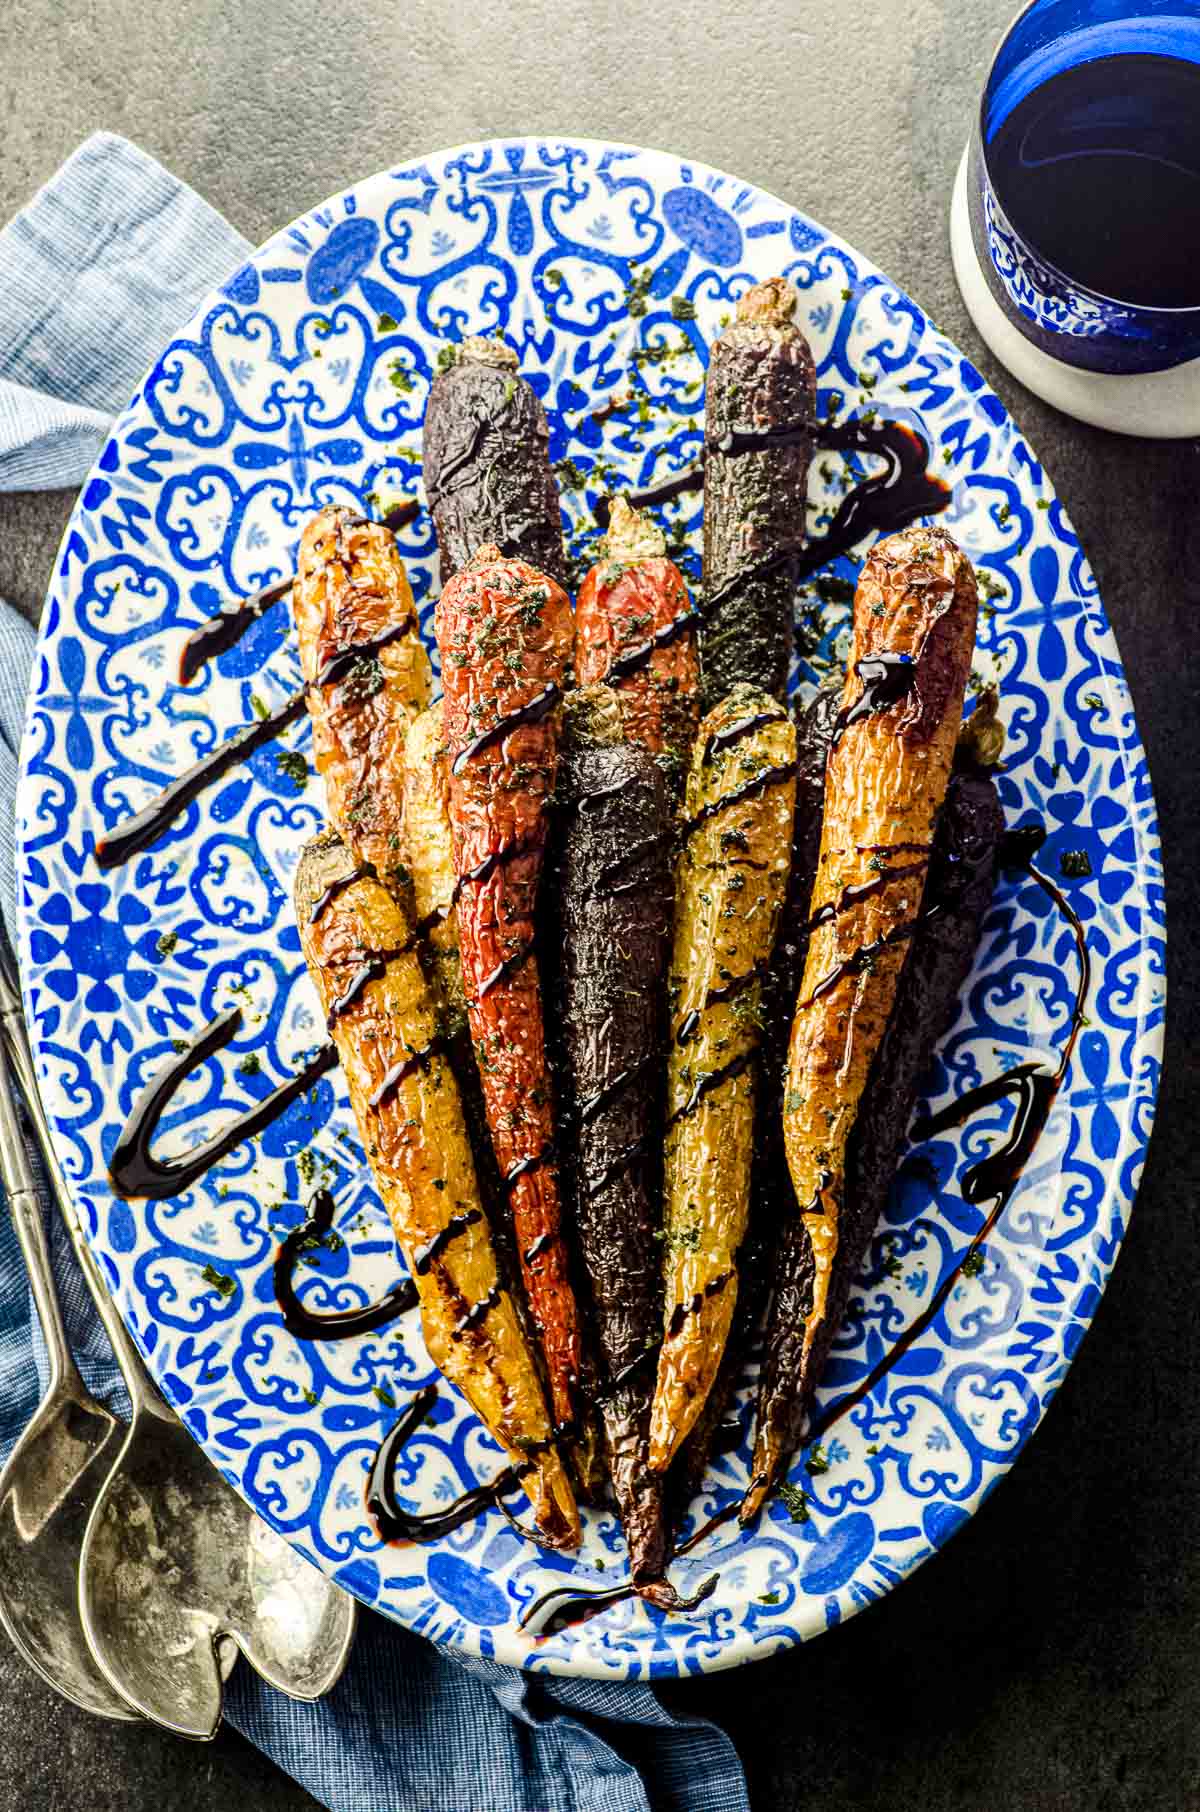 Overhead view of a blue patterned oval serving dish with rainbow carrots and drizzled with balsamic glaze